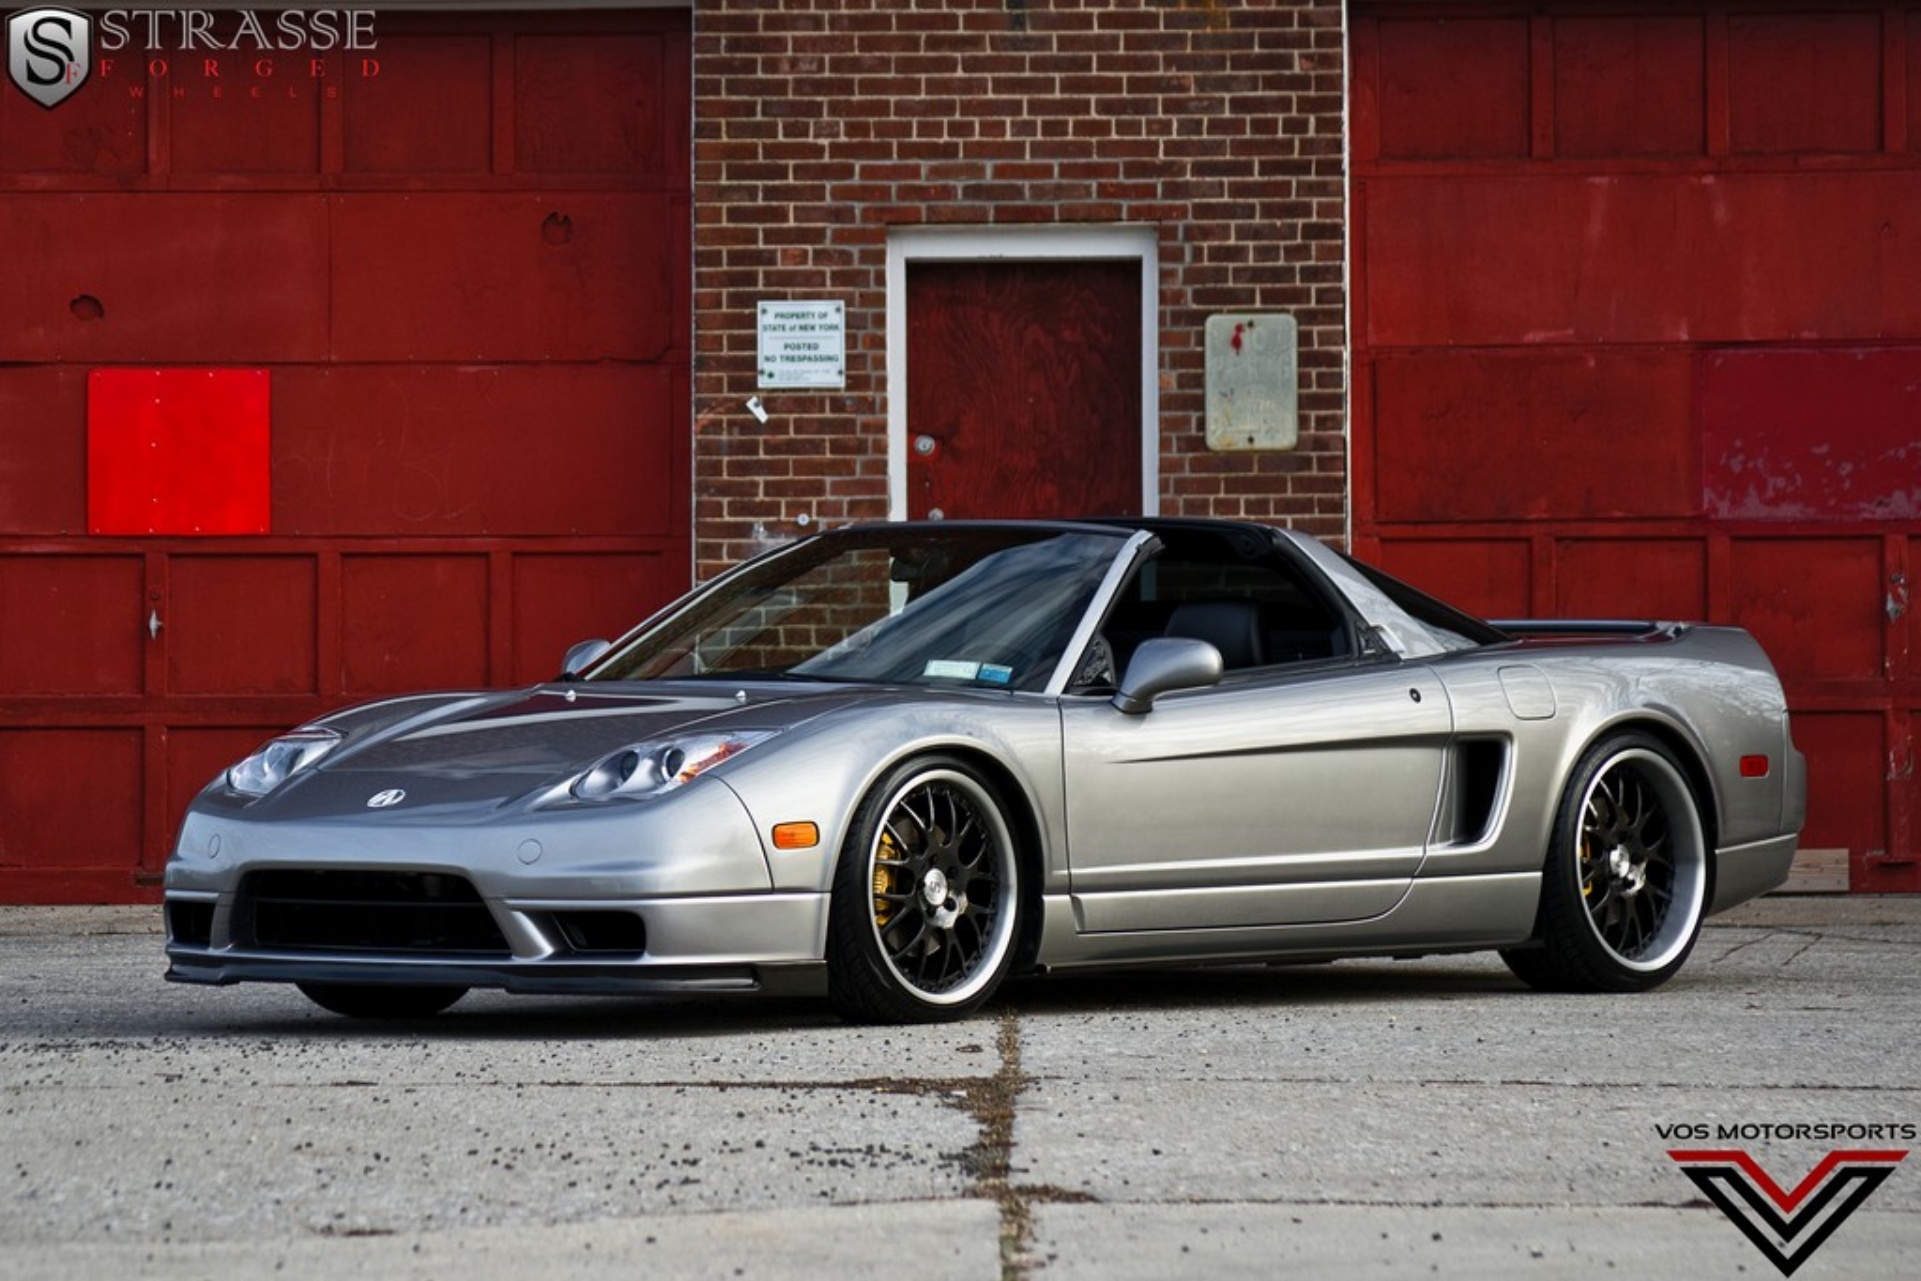 Acura Nsx Tuning Supercar Supercars Wallpapers Hd Desktop And Mobile Backgrounds